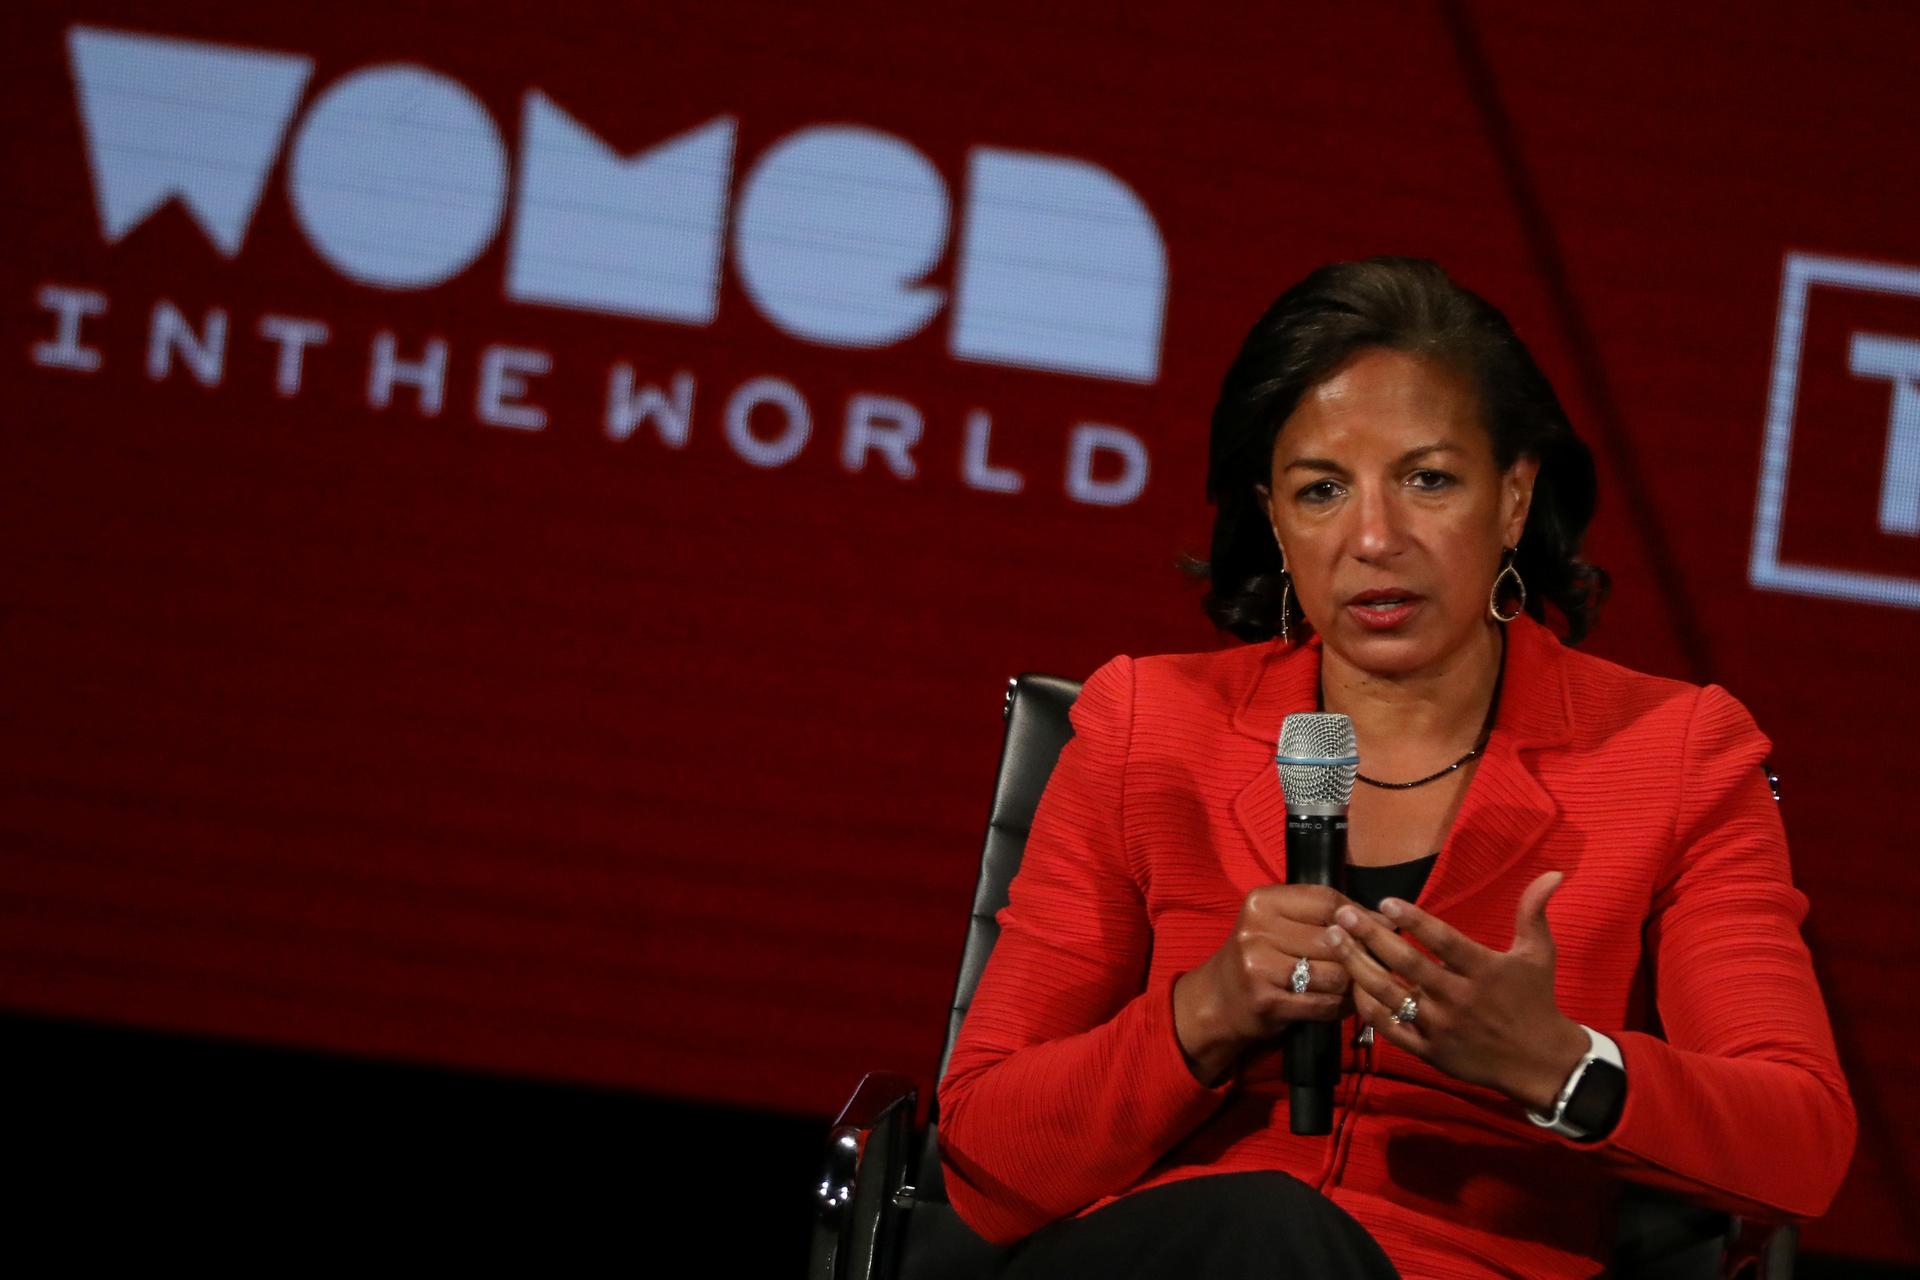 Former National Security Advisor and USS Ambassador to UN Susan Rice, speaks on stage at the Women In The World Summit in New York on April 11, 2019. 